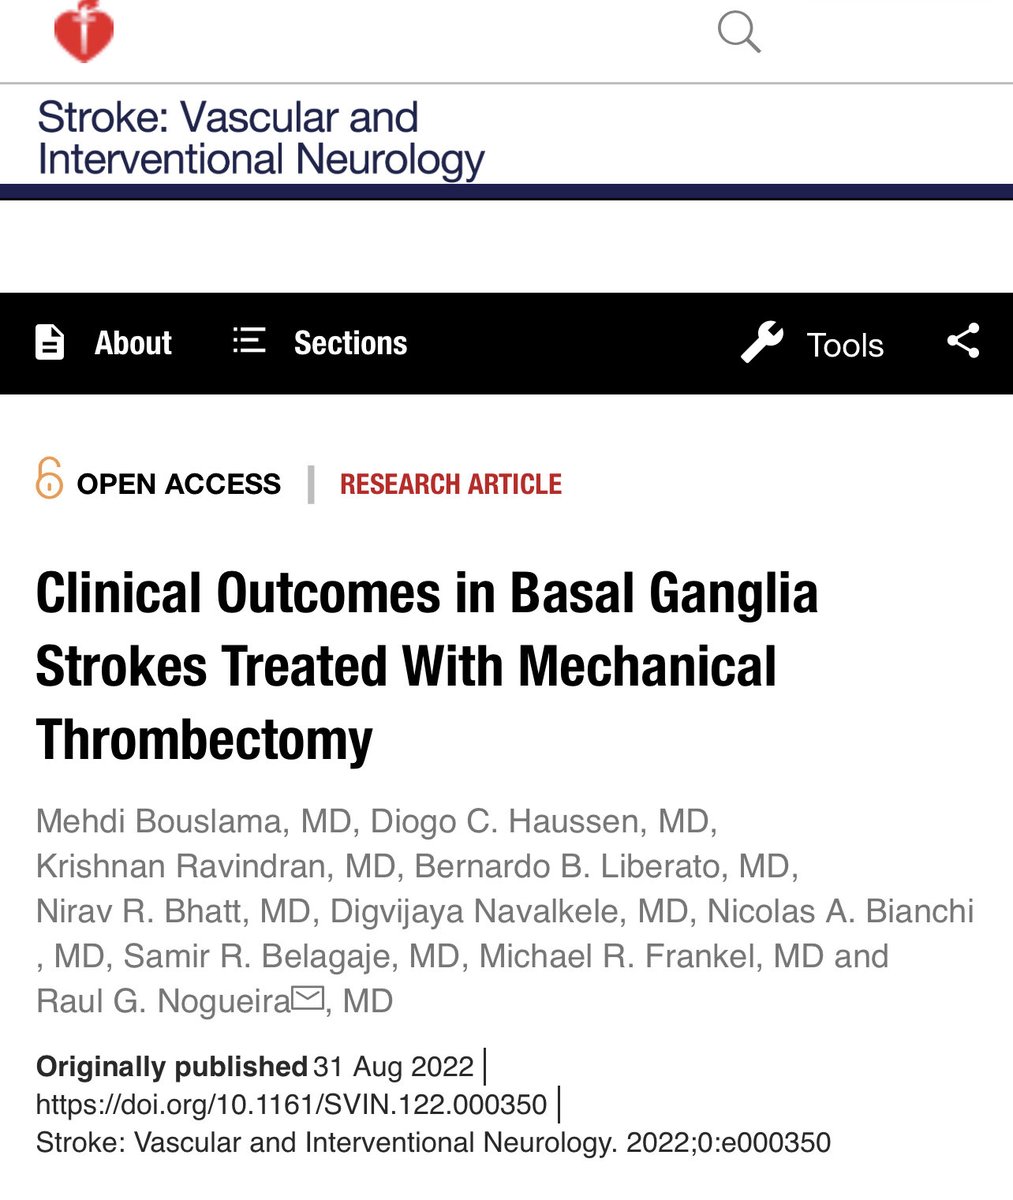 Total Basal Ganglia #strokes treated with #thrombectomy have higher risk of hemorrhagic conversion but similar functional outcomes as other infarct patterns. #nolvoleftbehind ⁦@RaulNogueiraMD⁩ @SVINJournal⁩ ⁦@svinsociety⁩ ⁦@SNISinfo⁩ ⁦@cvsection⁩ ⁦